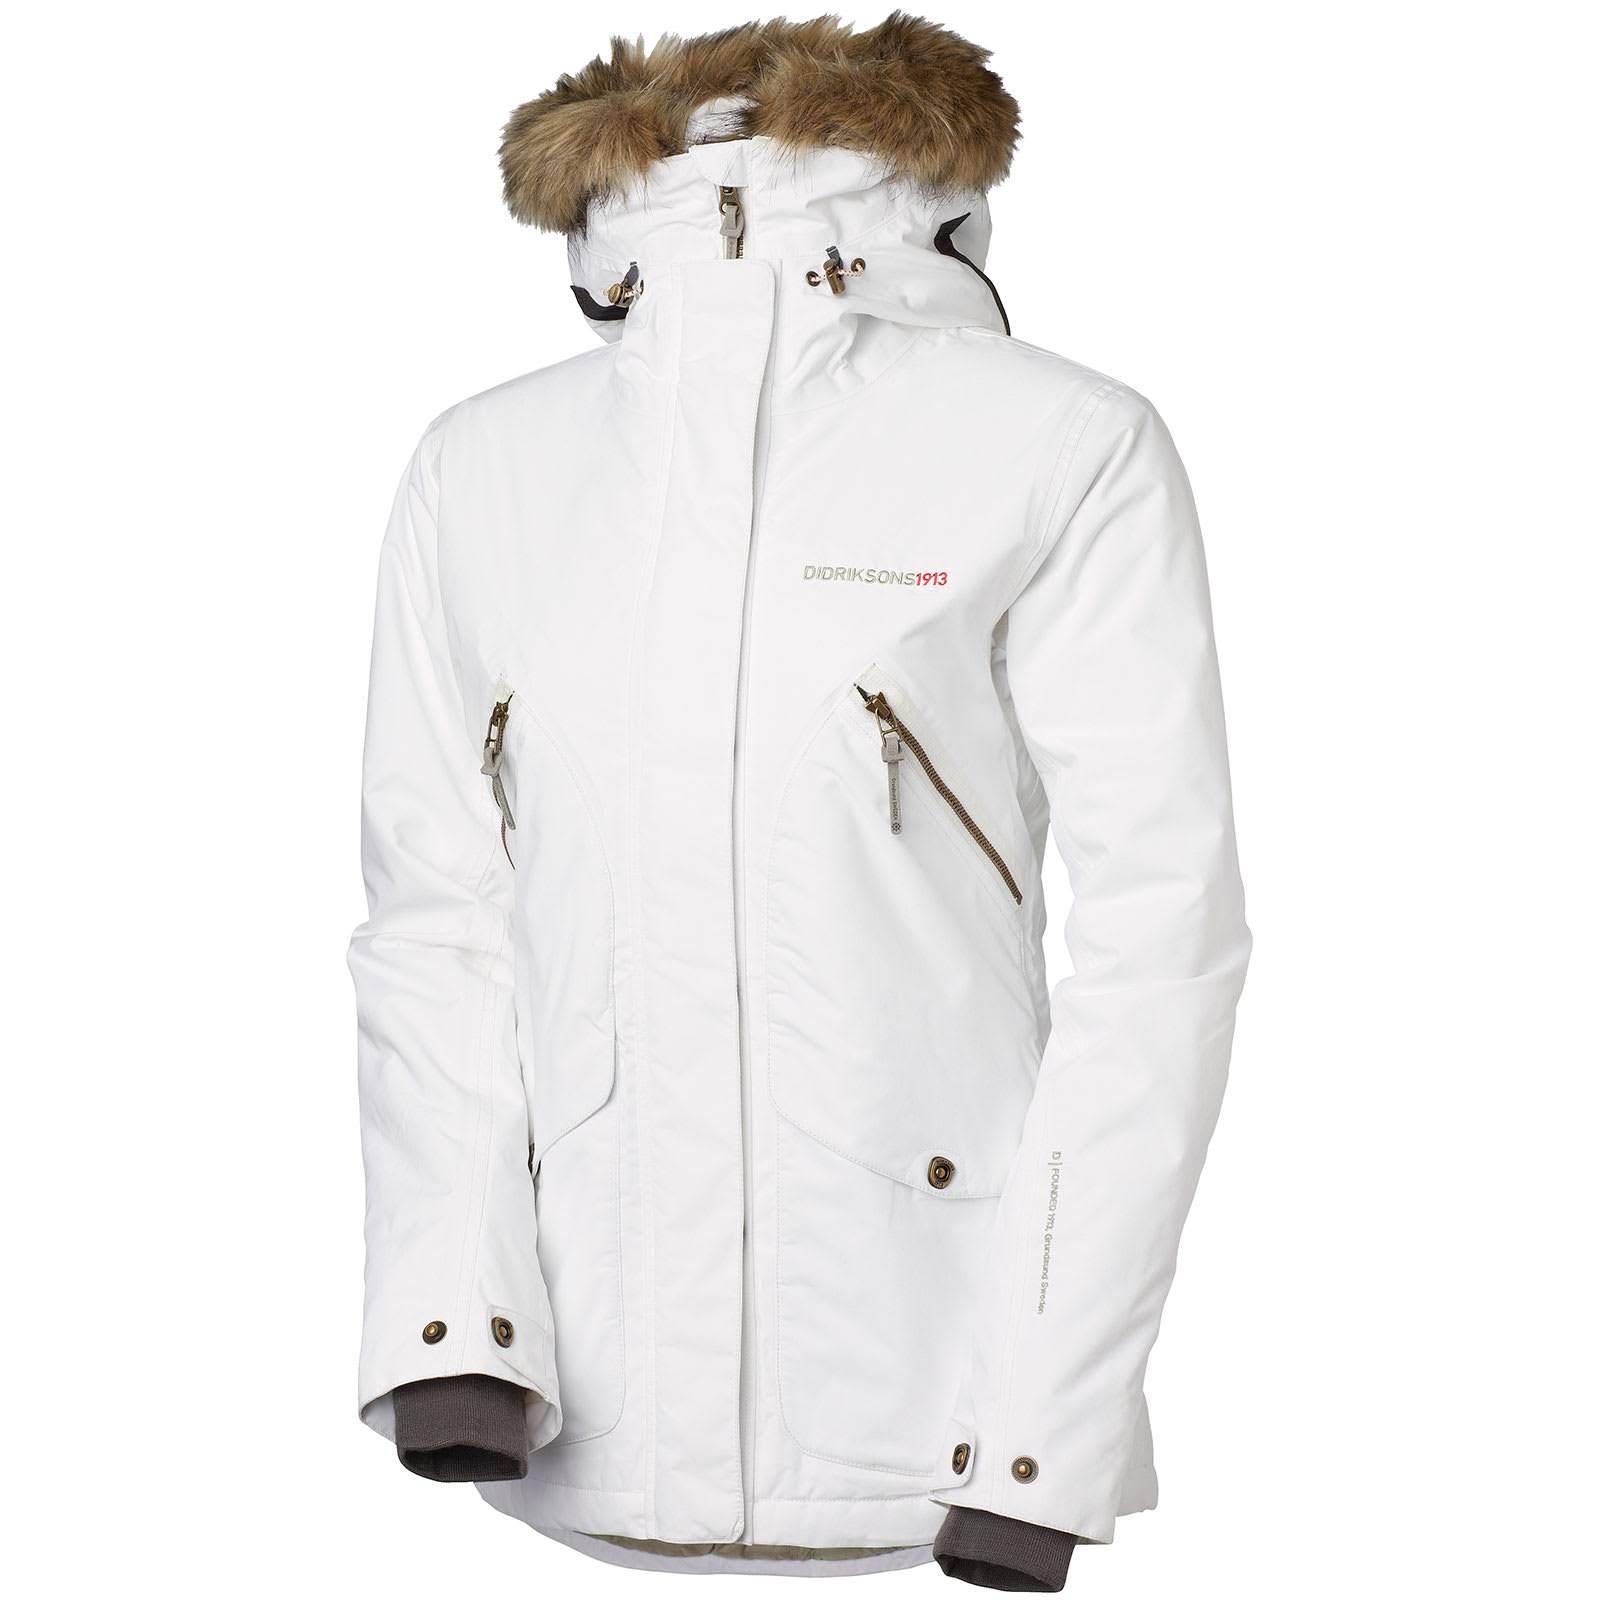 Buy Didriksons Ronja Women's Jacket Outnorth